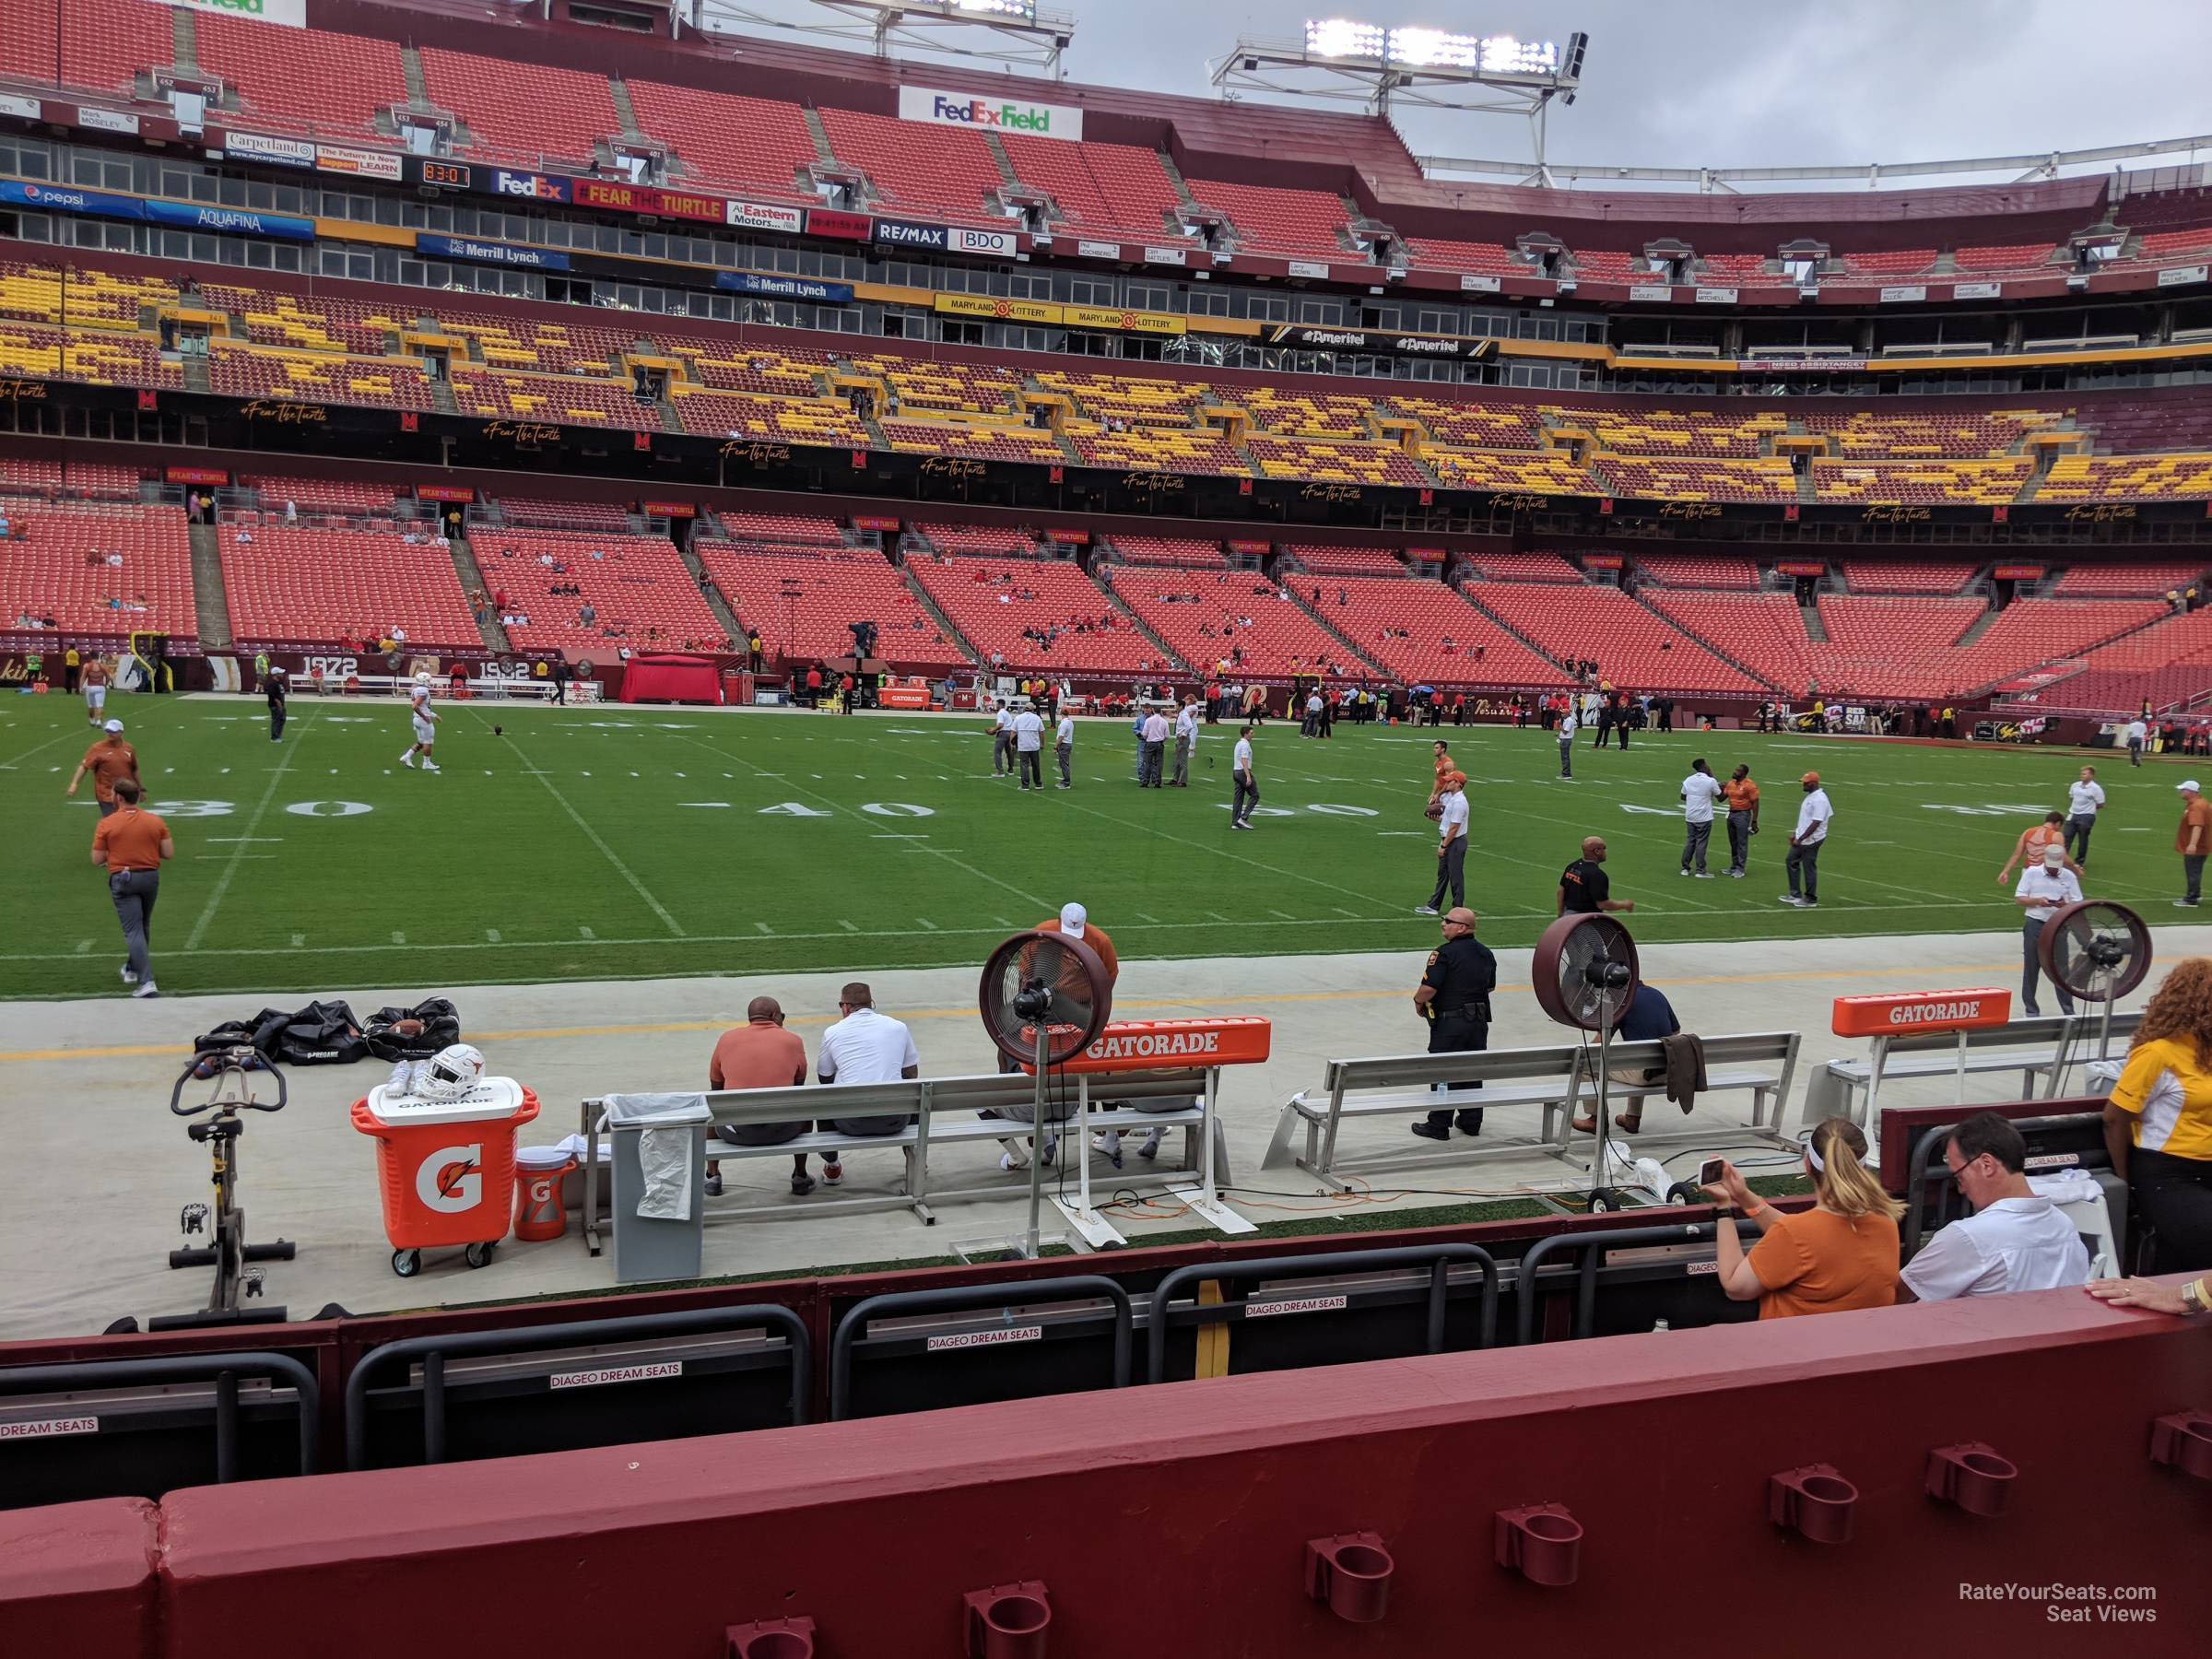 section 123, row 4 seat view  - fedexfield